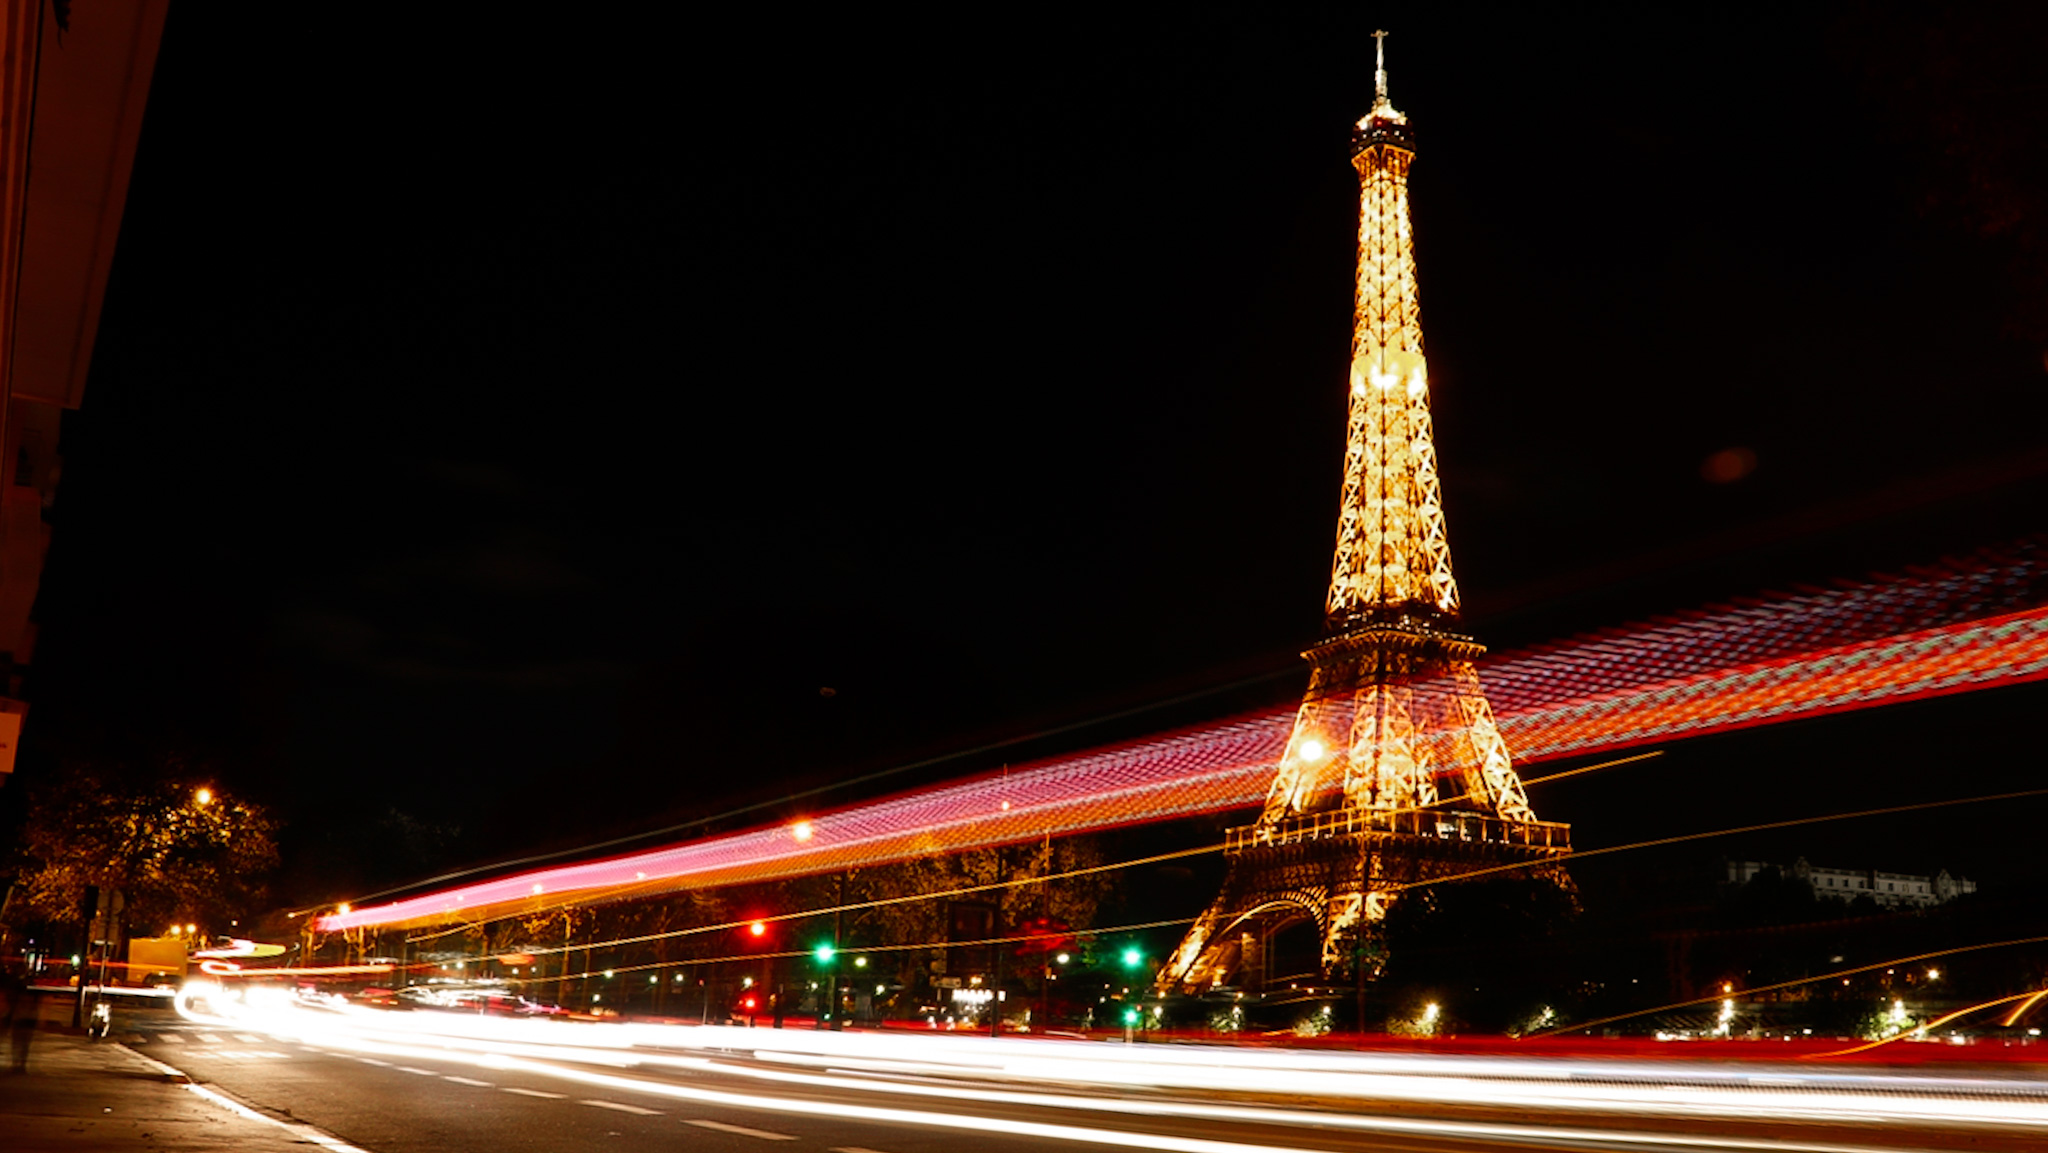 The Best Spots To Photograph Eiffel Tower - Beauty And The Being